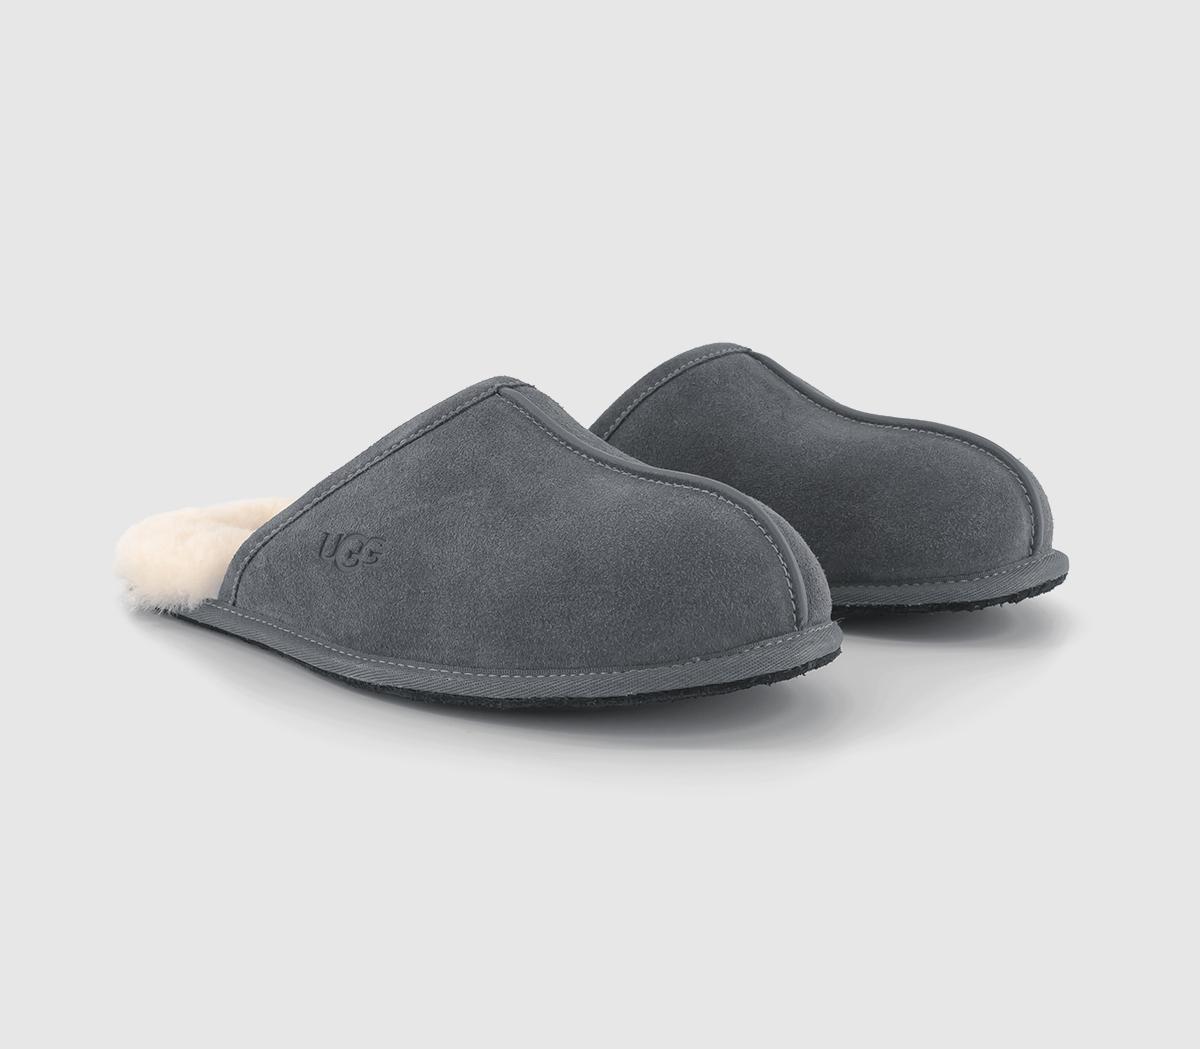 UGG Scuff Slippers Dark Grey - Men's Casual Shoes